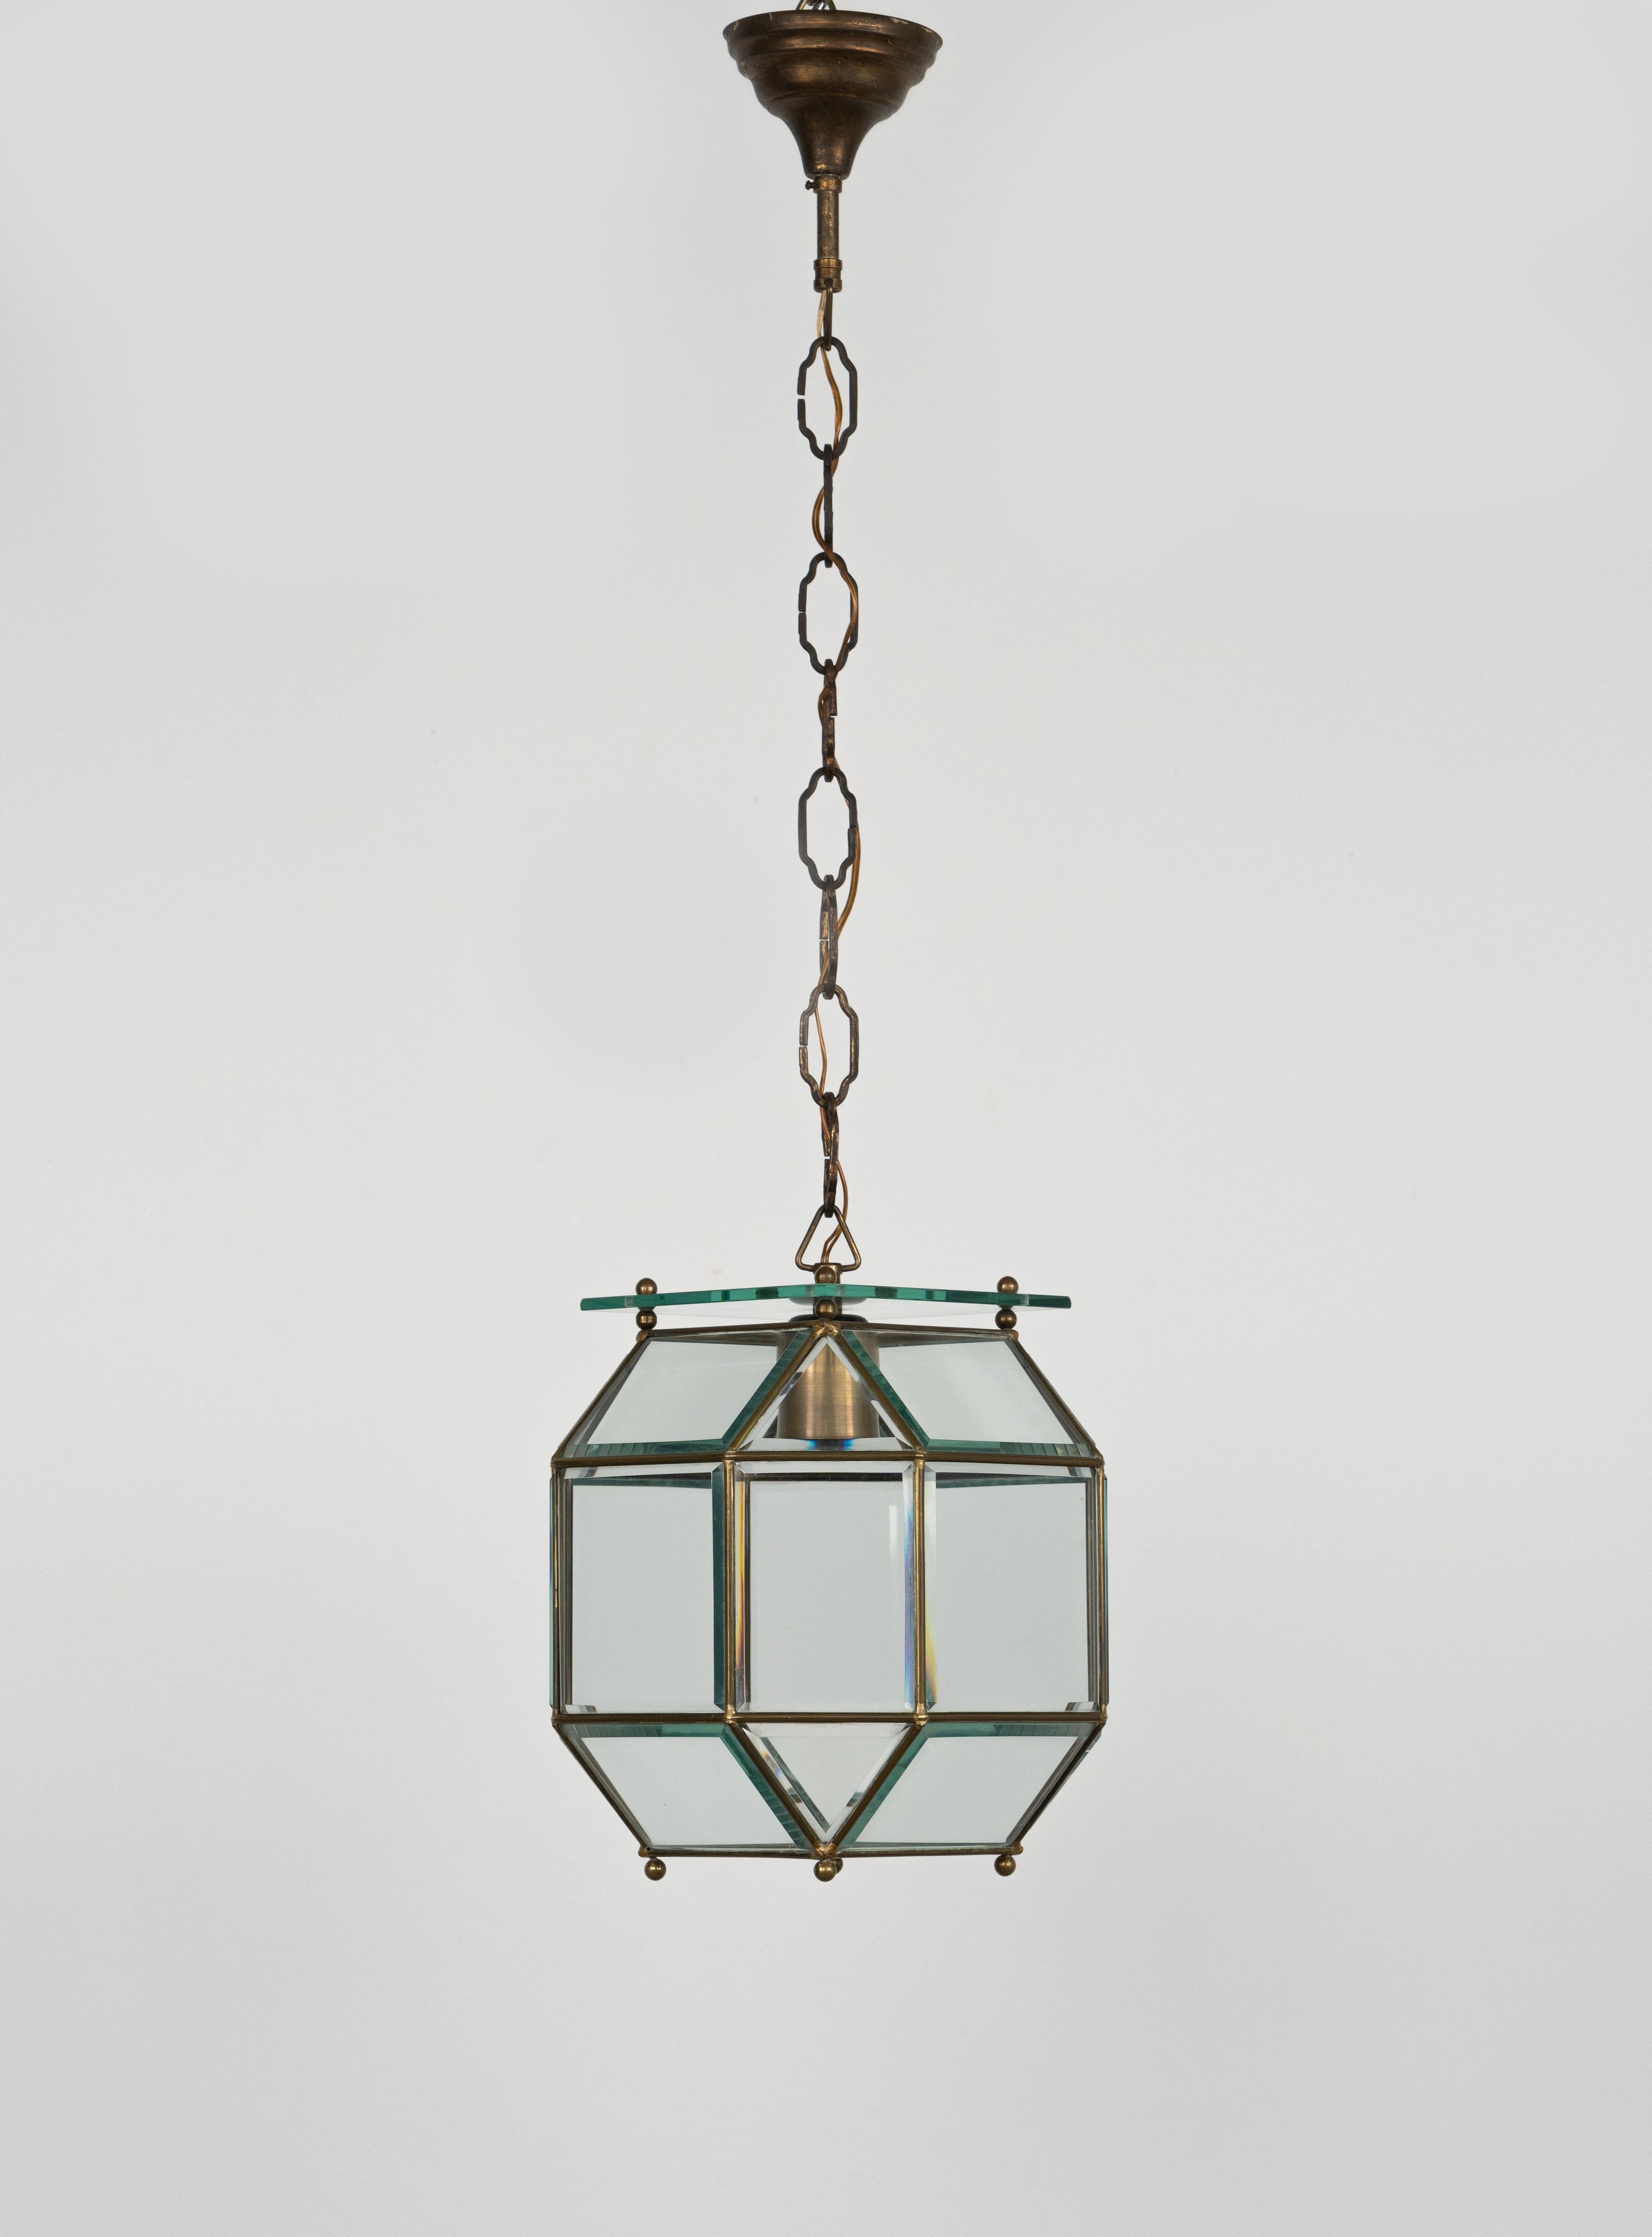 Midcentury Chandelier in Brass and Beveled Glass Adolf Loos Style, Italy 1950s For Sale 2